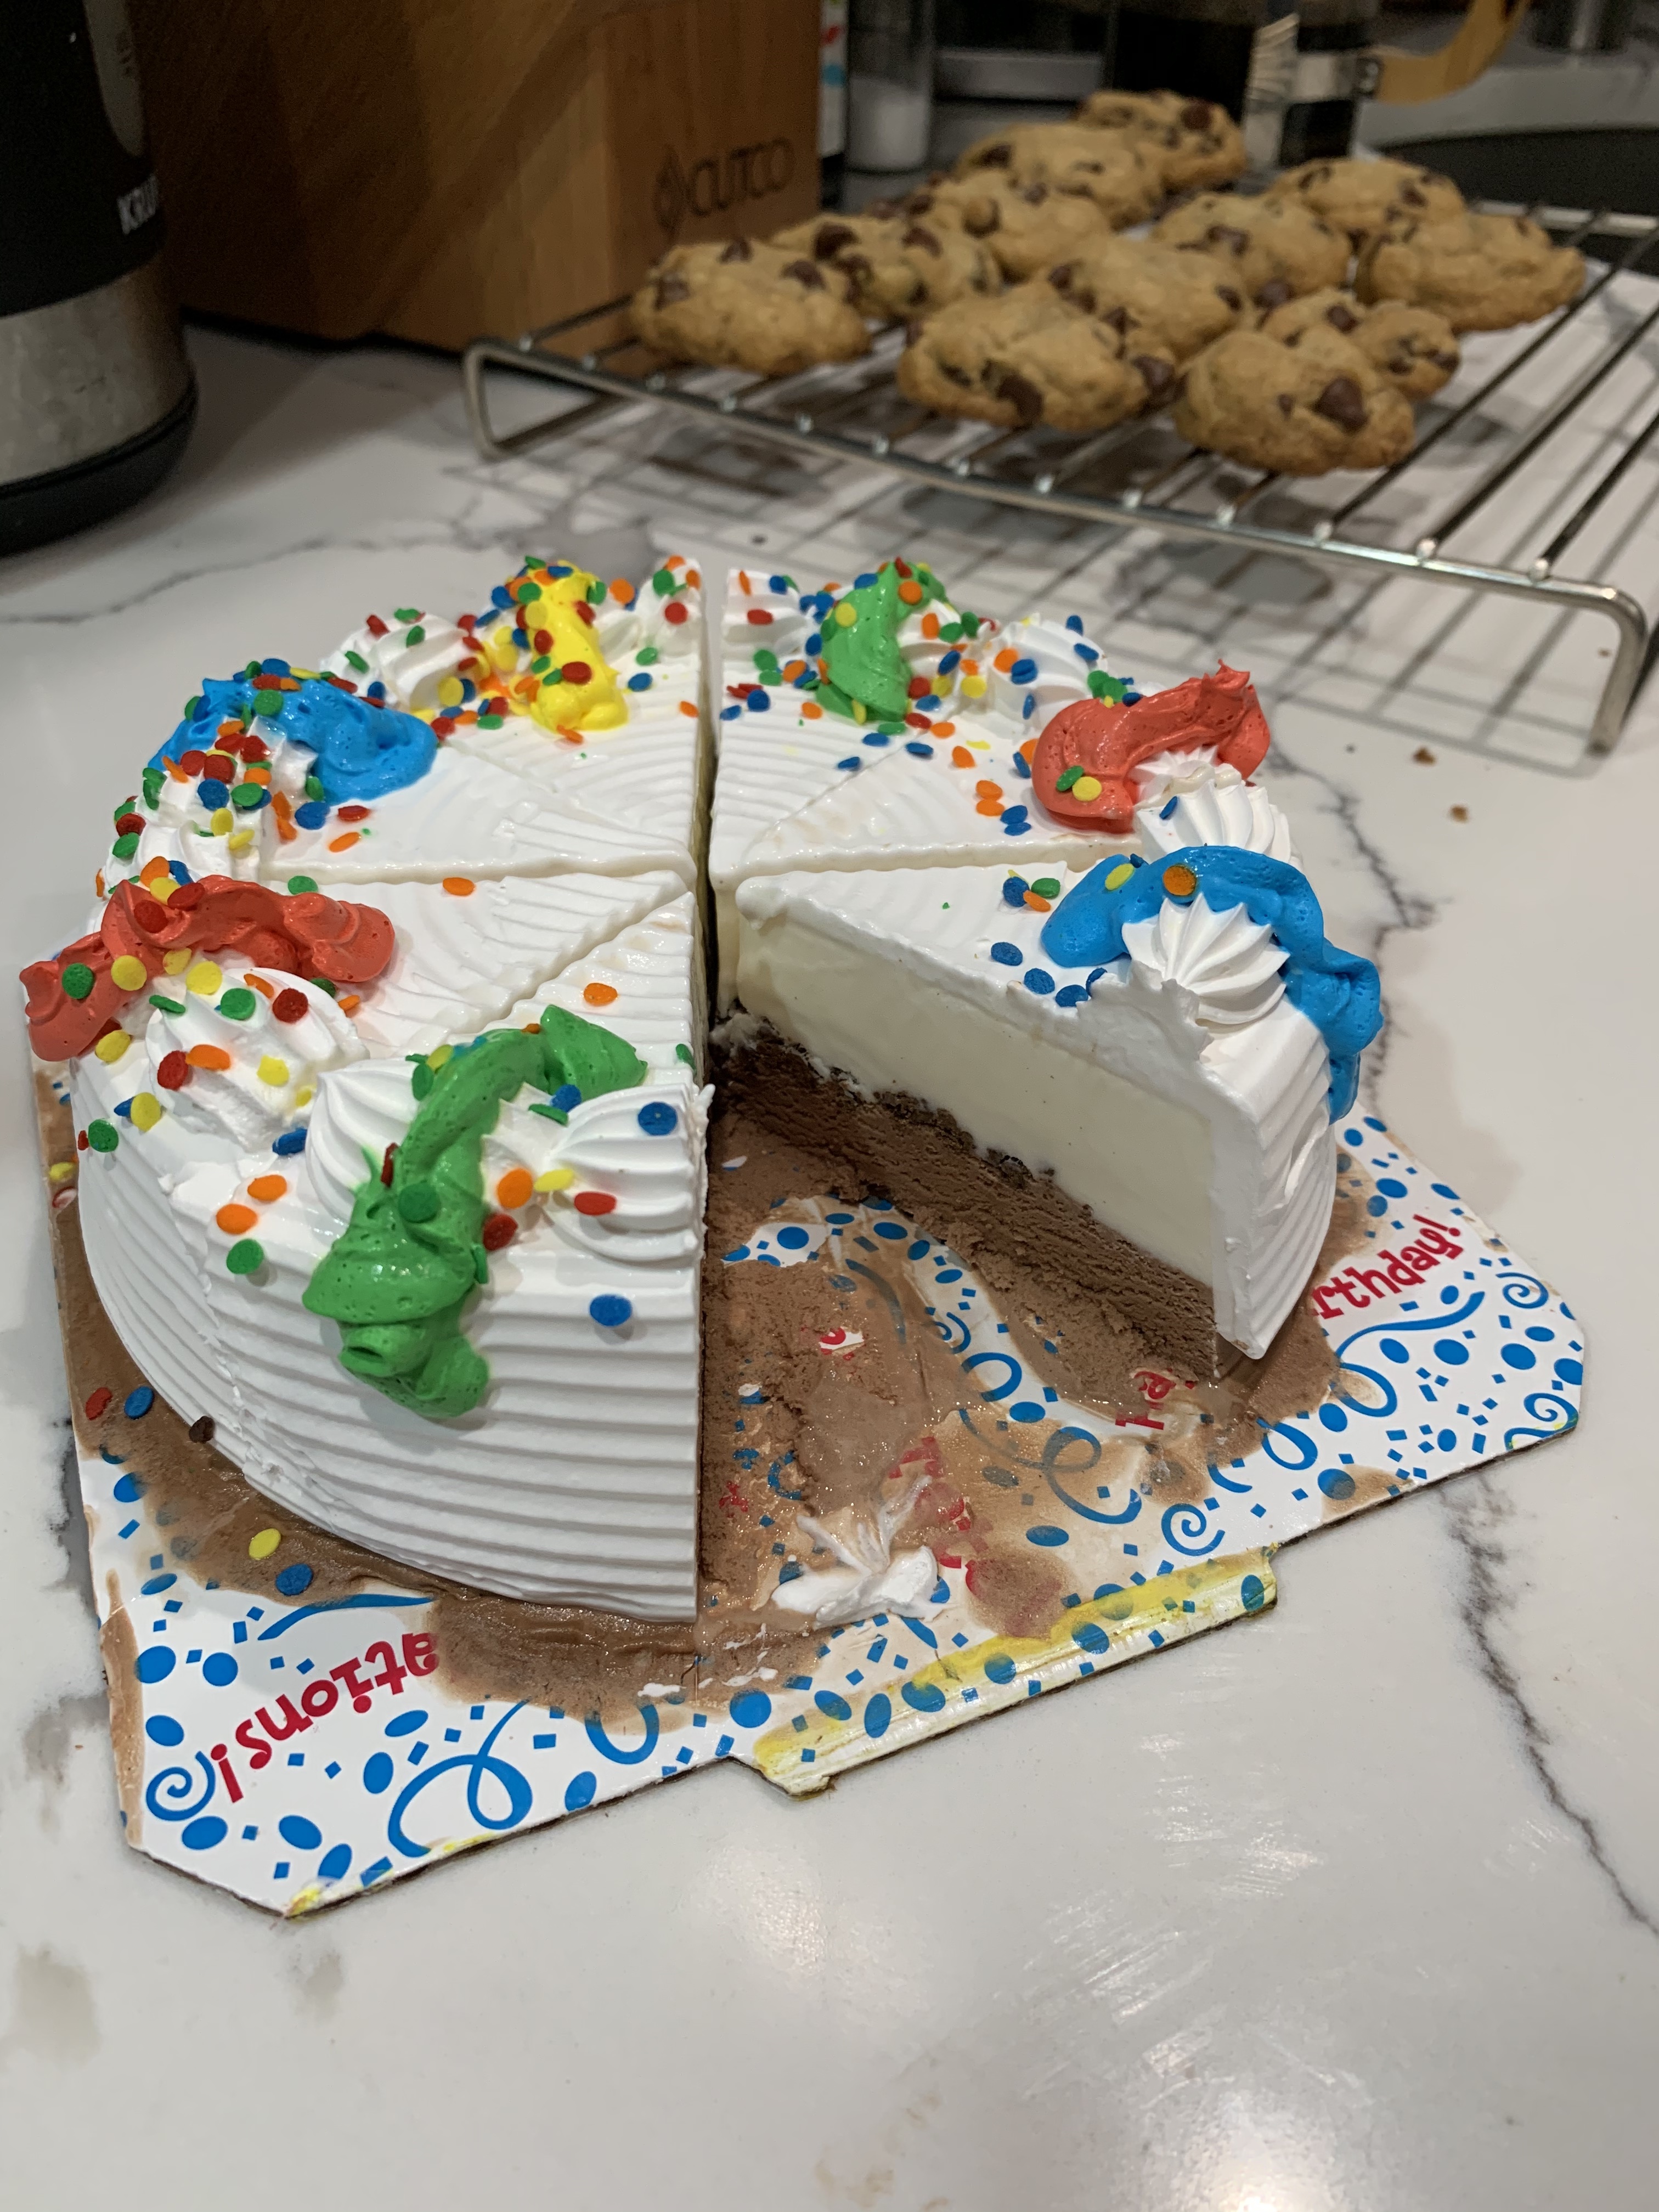 Carvel brand ice cream cake with vanilla and chocolate ice cream, cake is sliced with chocolate chip cookies in the background